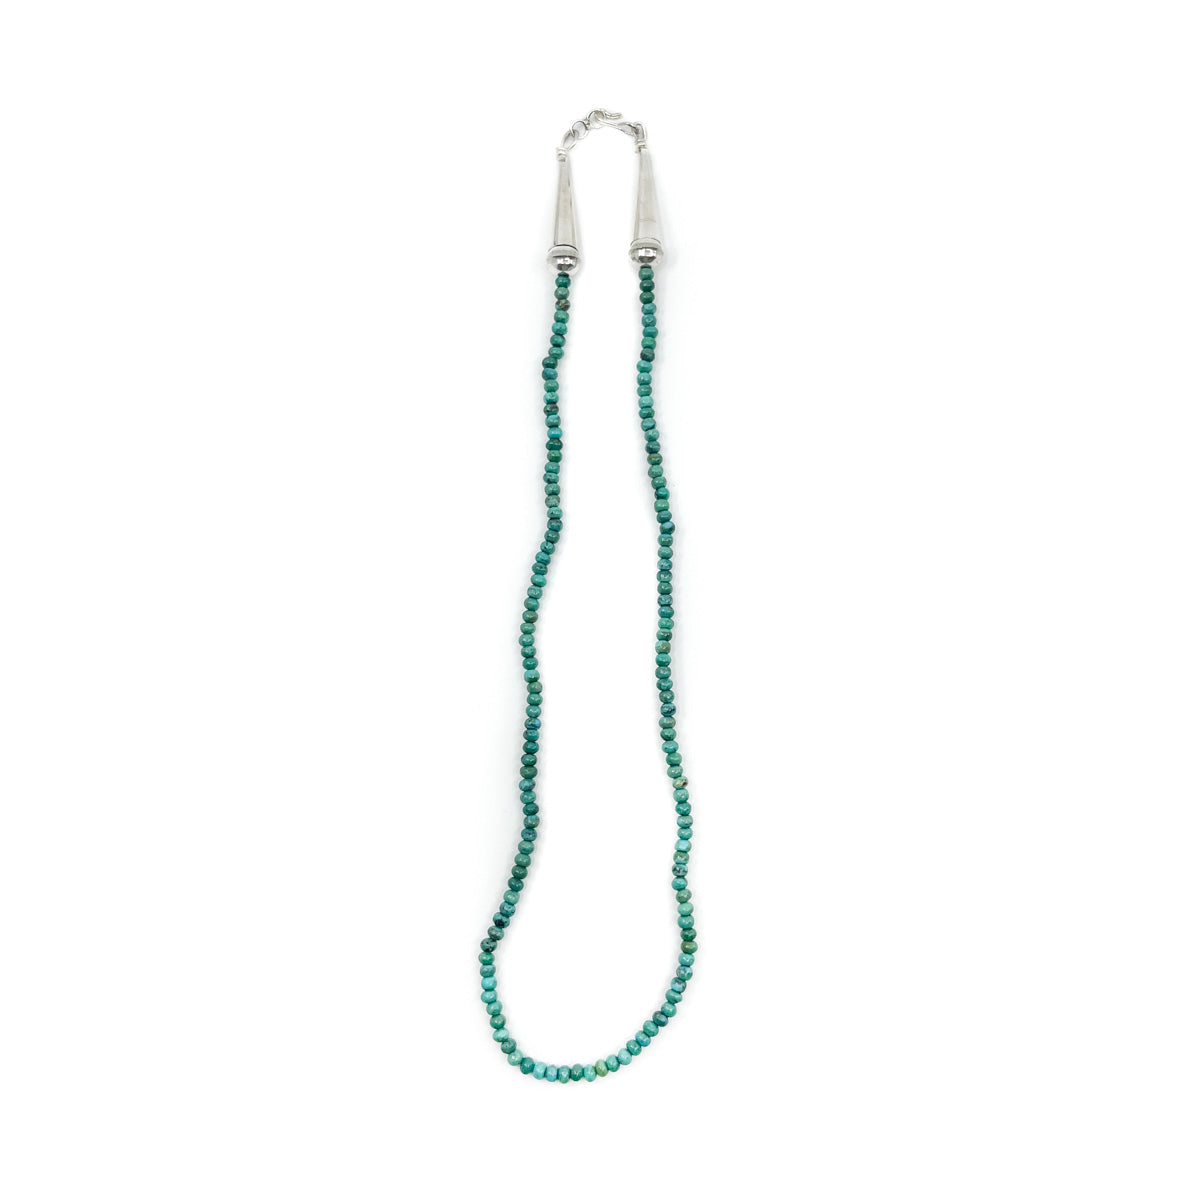 Beautiful Blue-Green Turquoise Bead Necklace